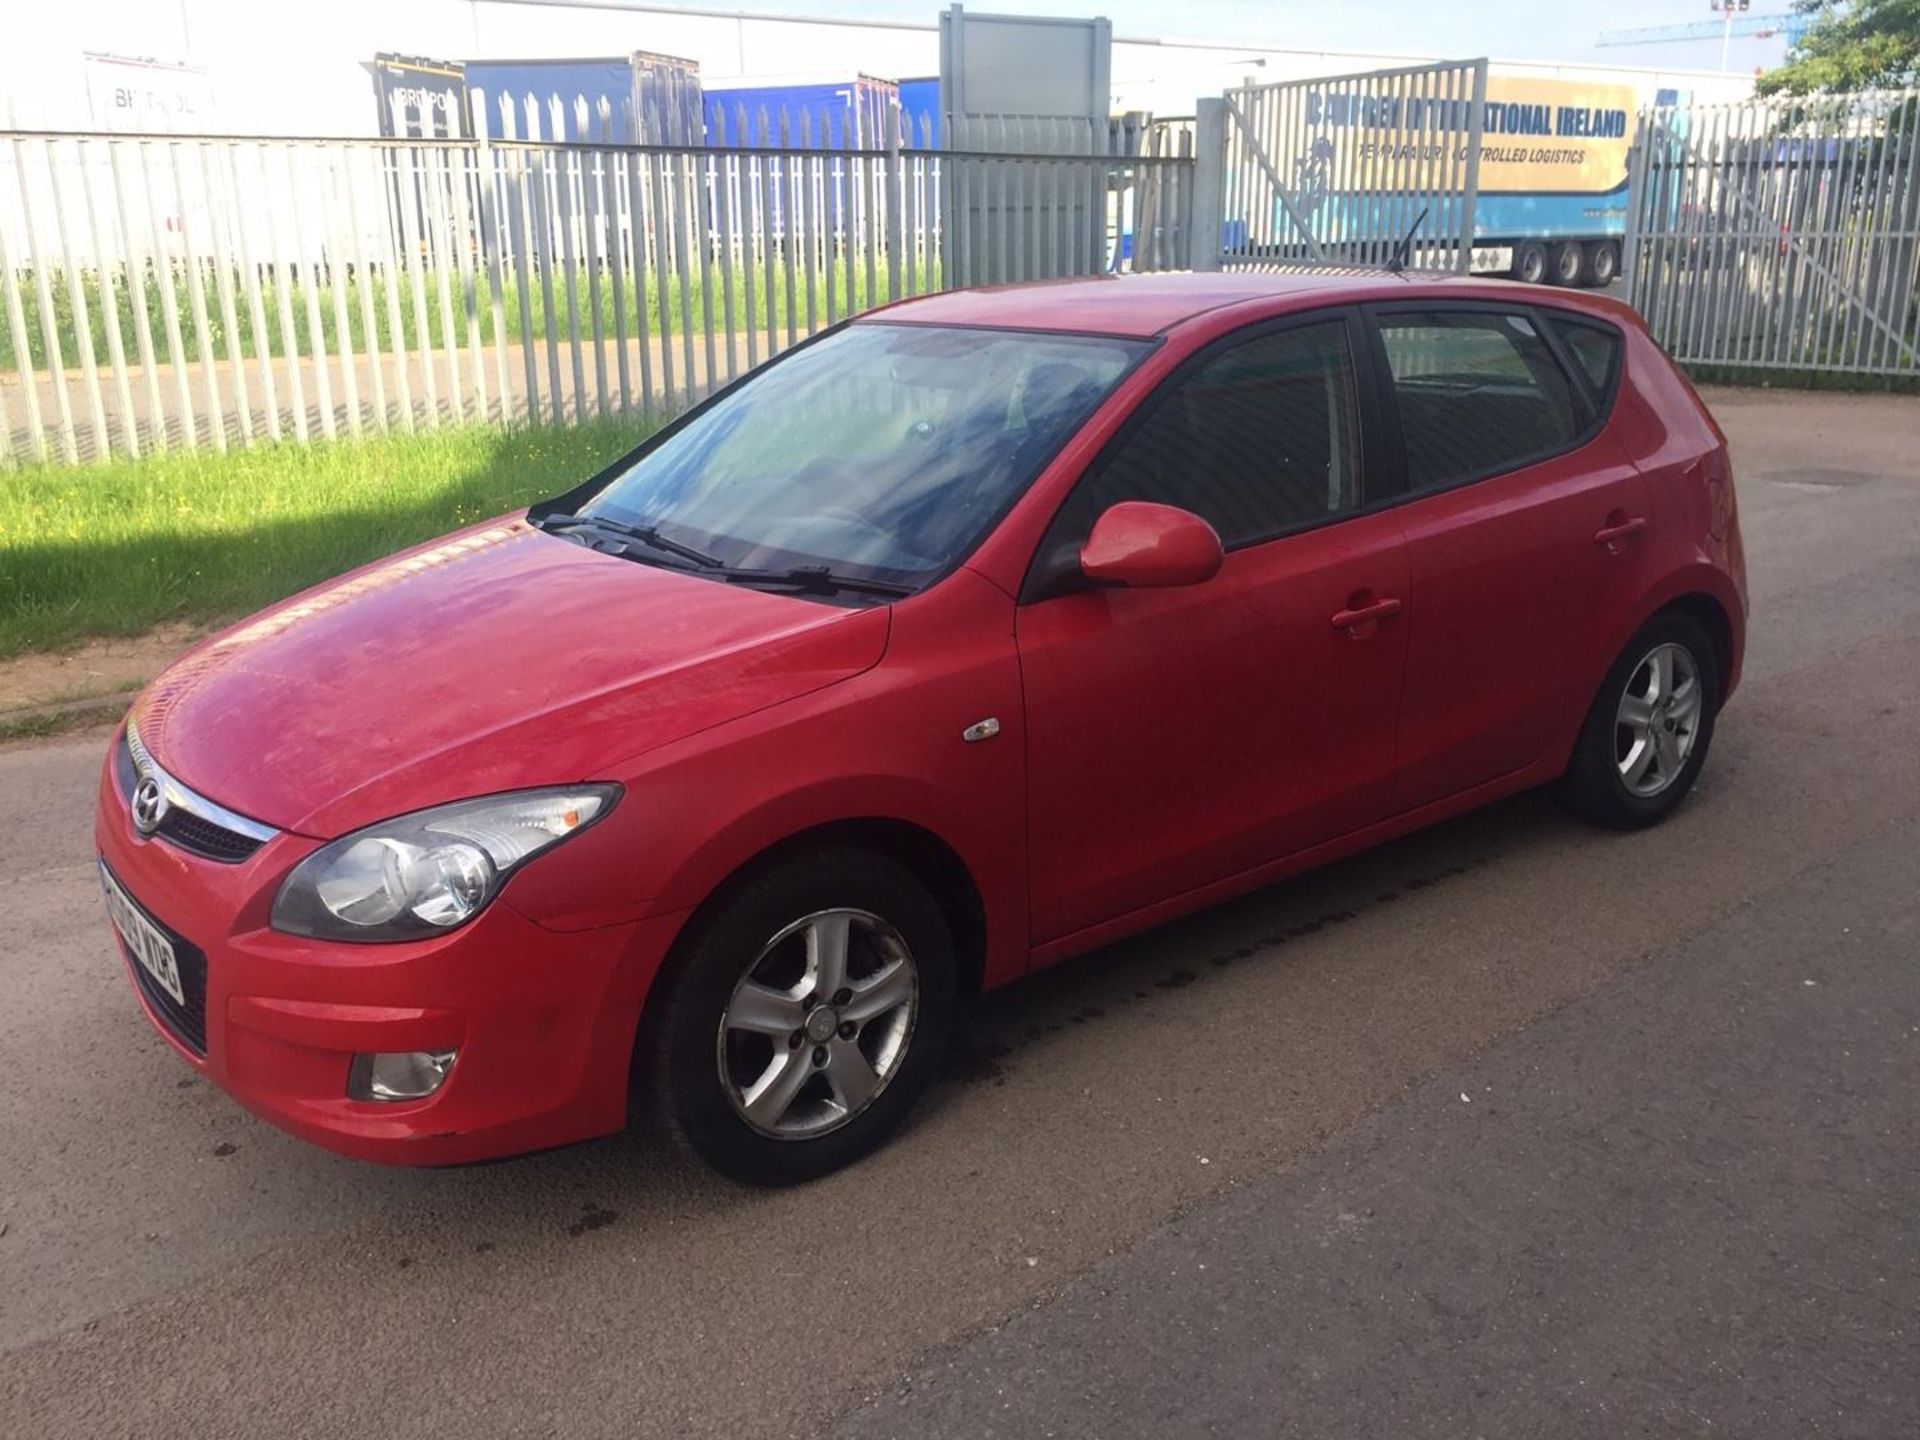 2009 Hyundai i30 Comfort 1.6 Petrol - CL505 - NO VAT ON THE HAMMER - Location: Corby - Image 5 of 11